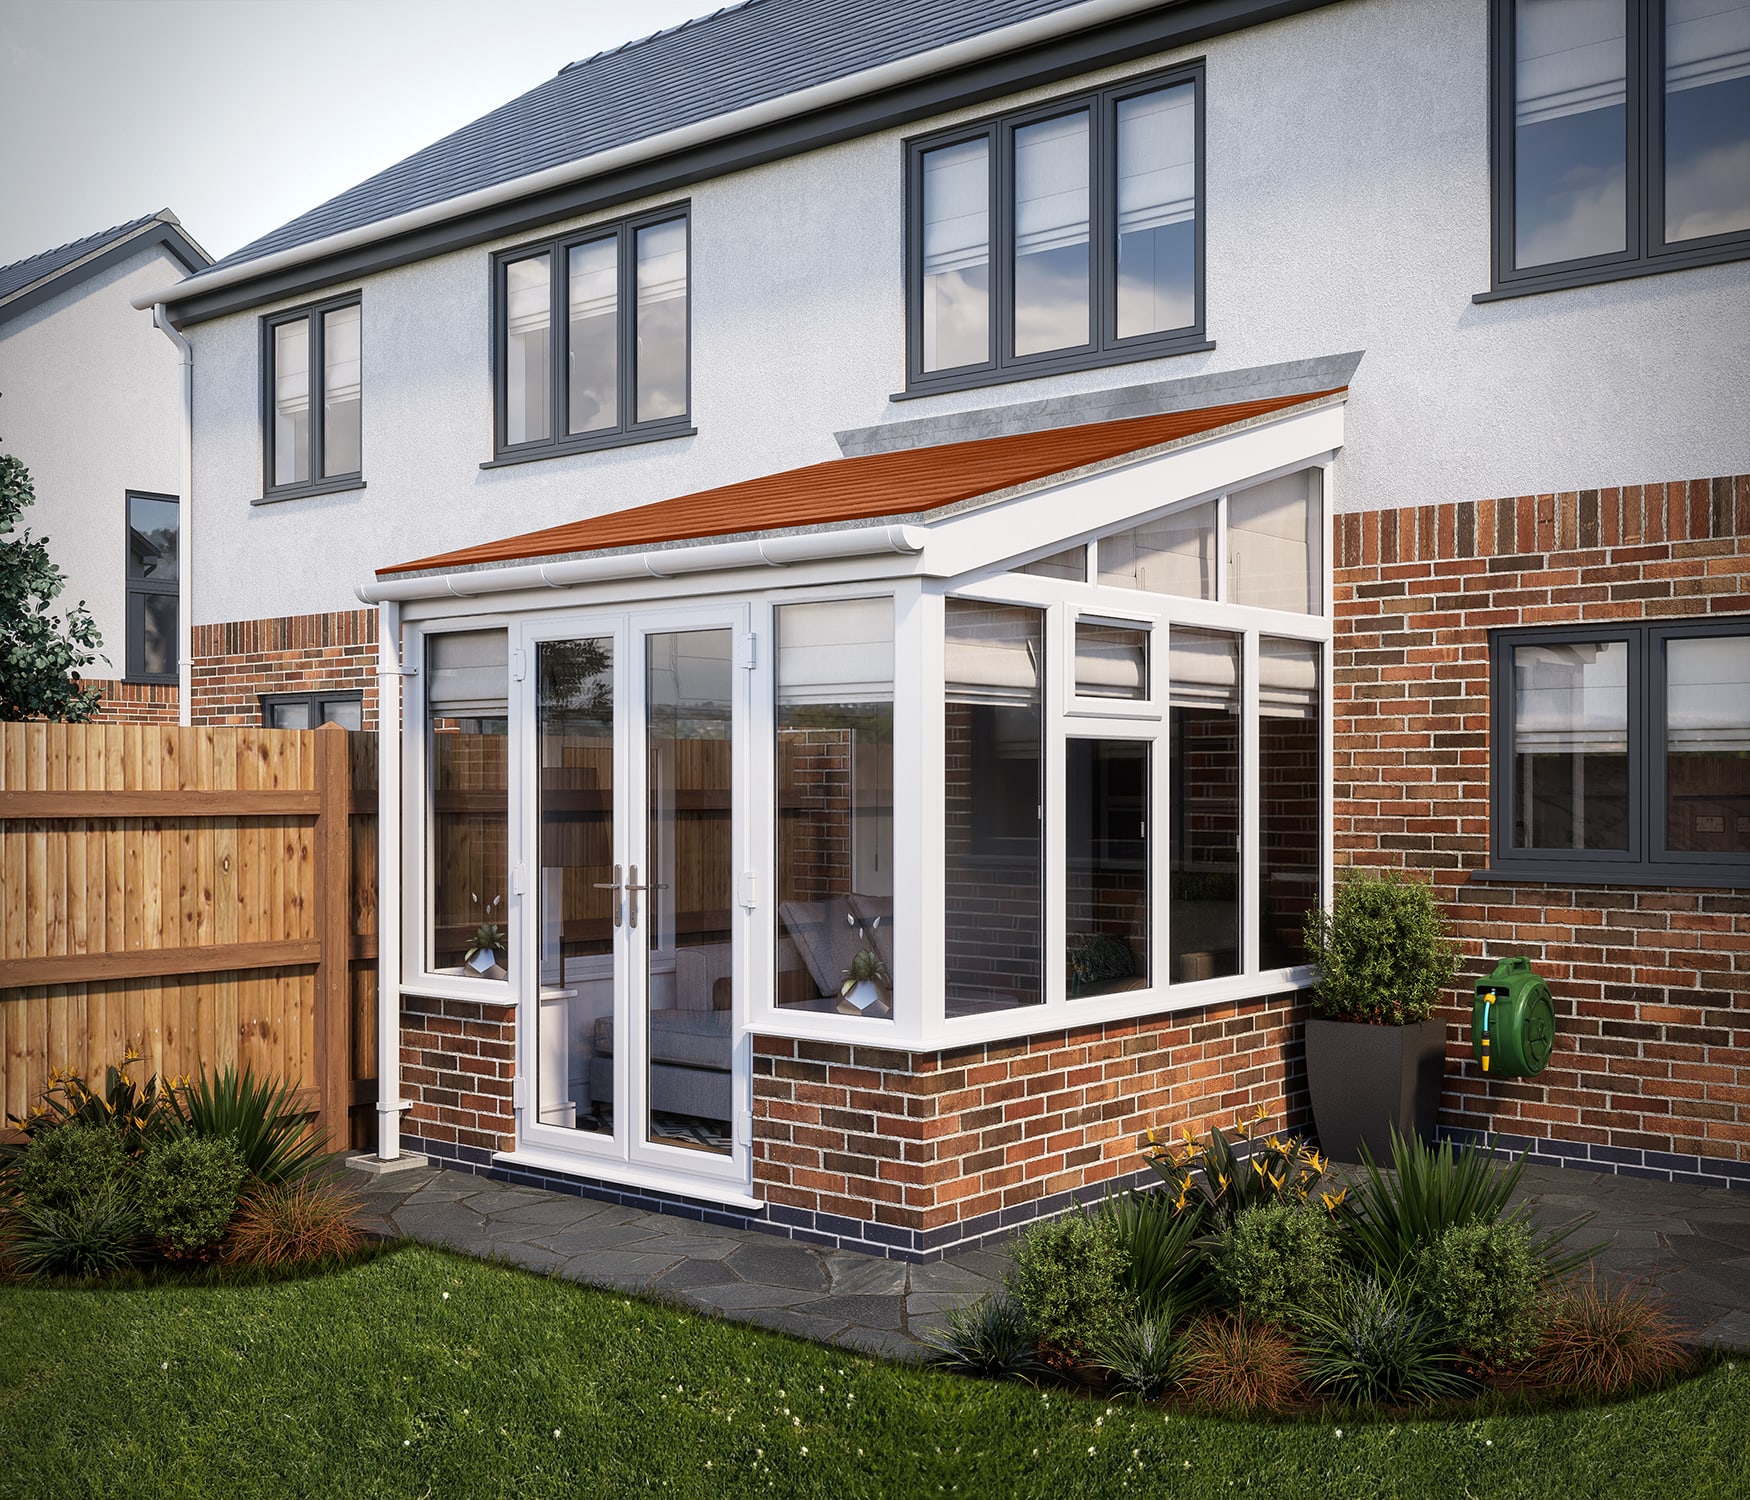 SOLid roof Lean to Conservatory White Frames Dwarf